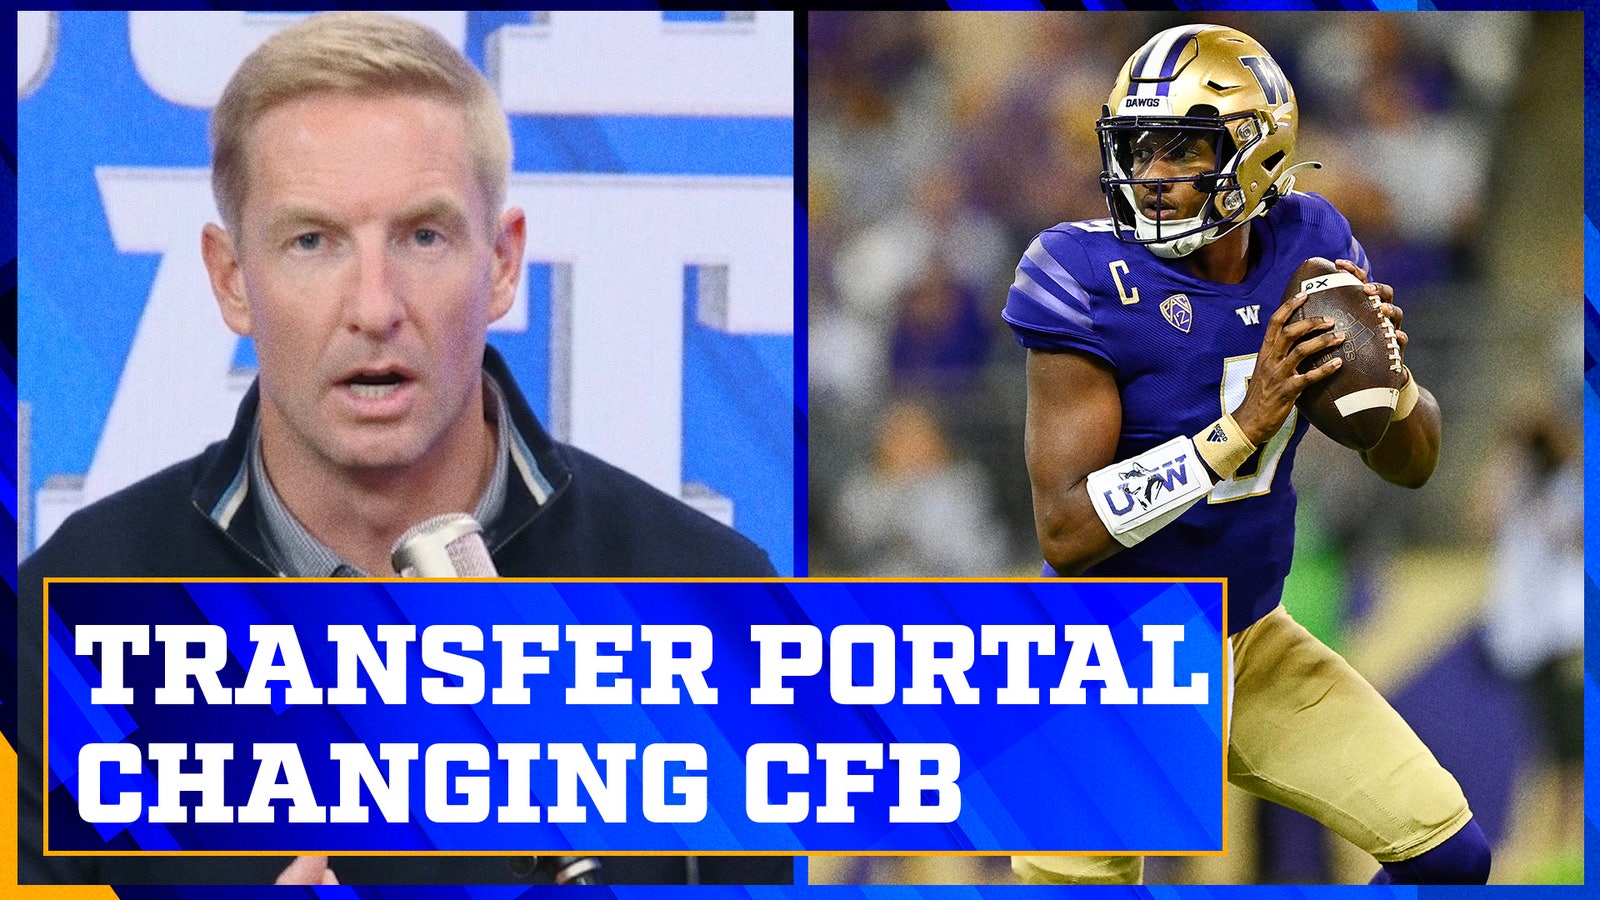 How the transfer portal is impacting college football as we know it